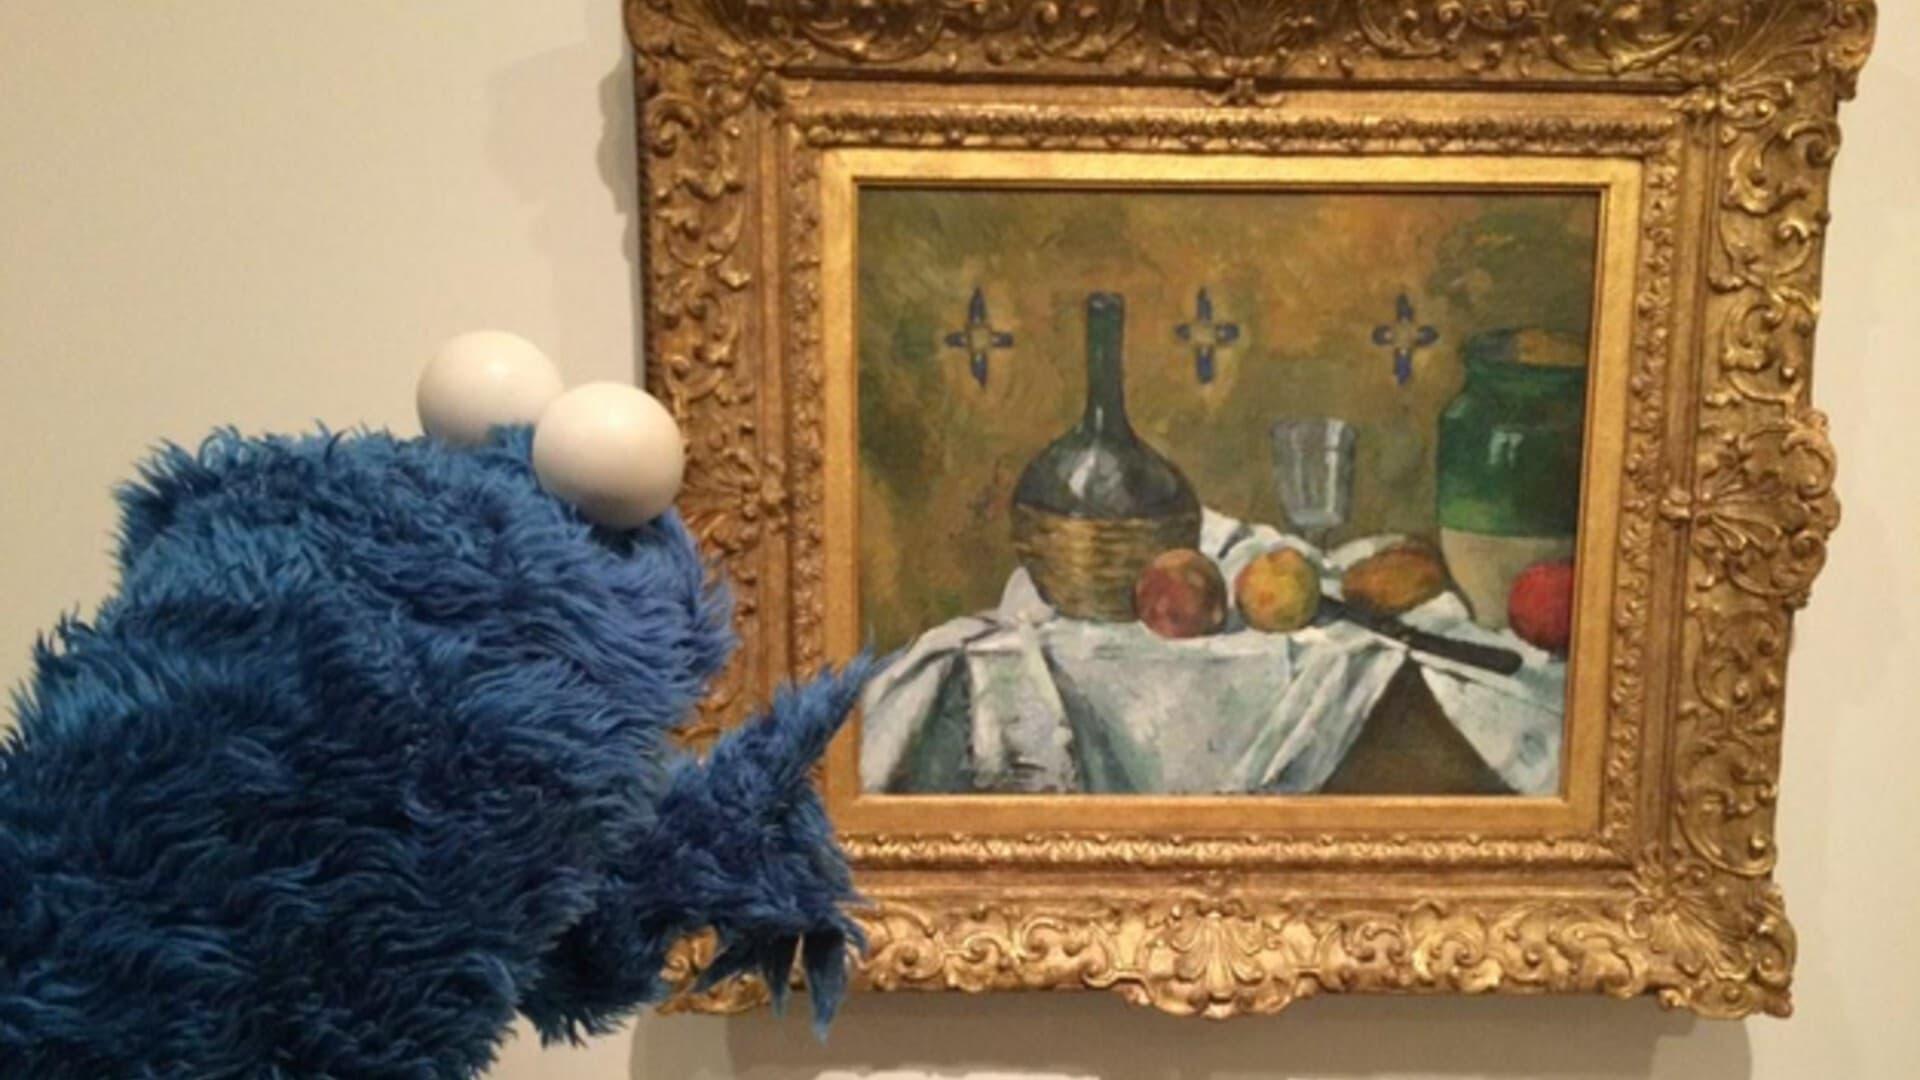 Don't Eat the Pictures: Sesame Street at the Metropolitan Museum of Art backdrop